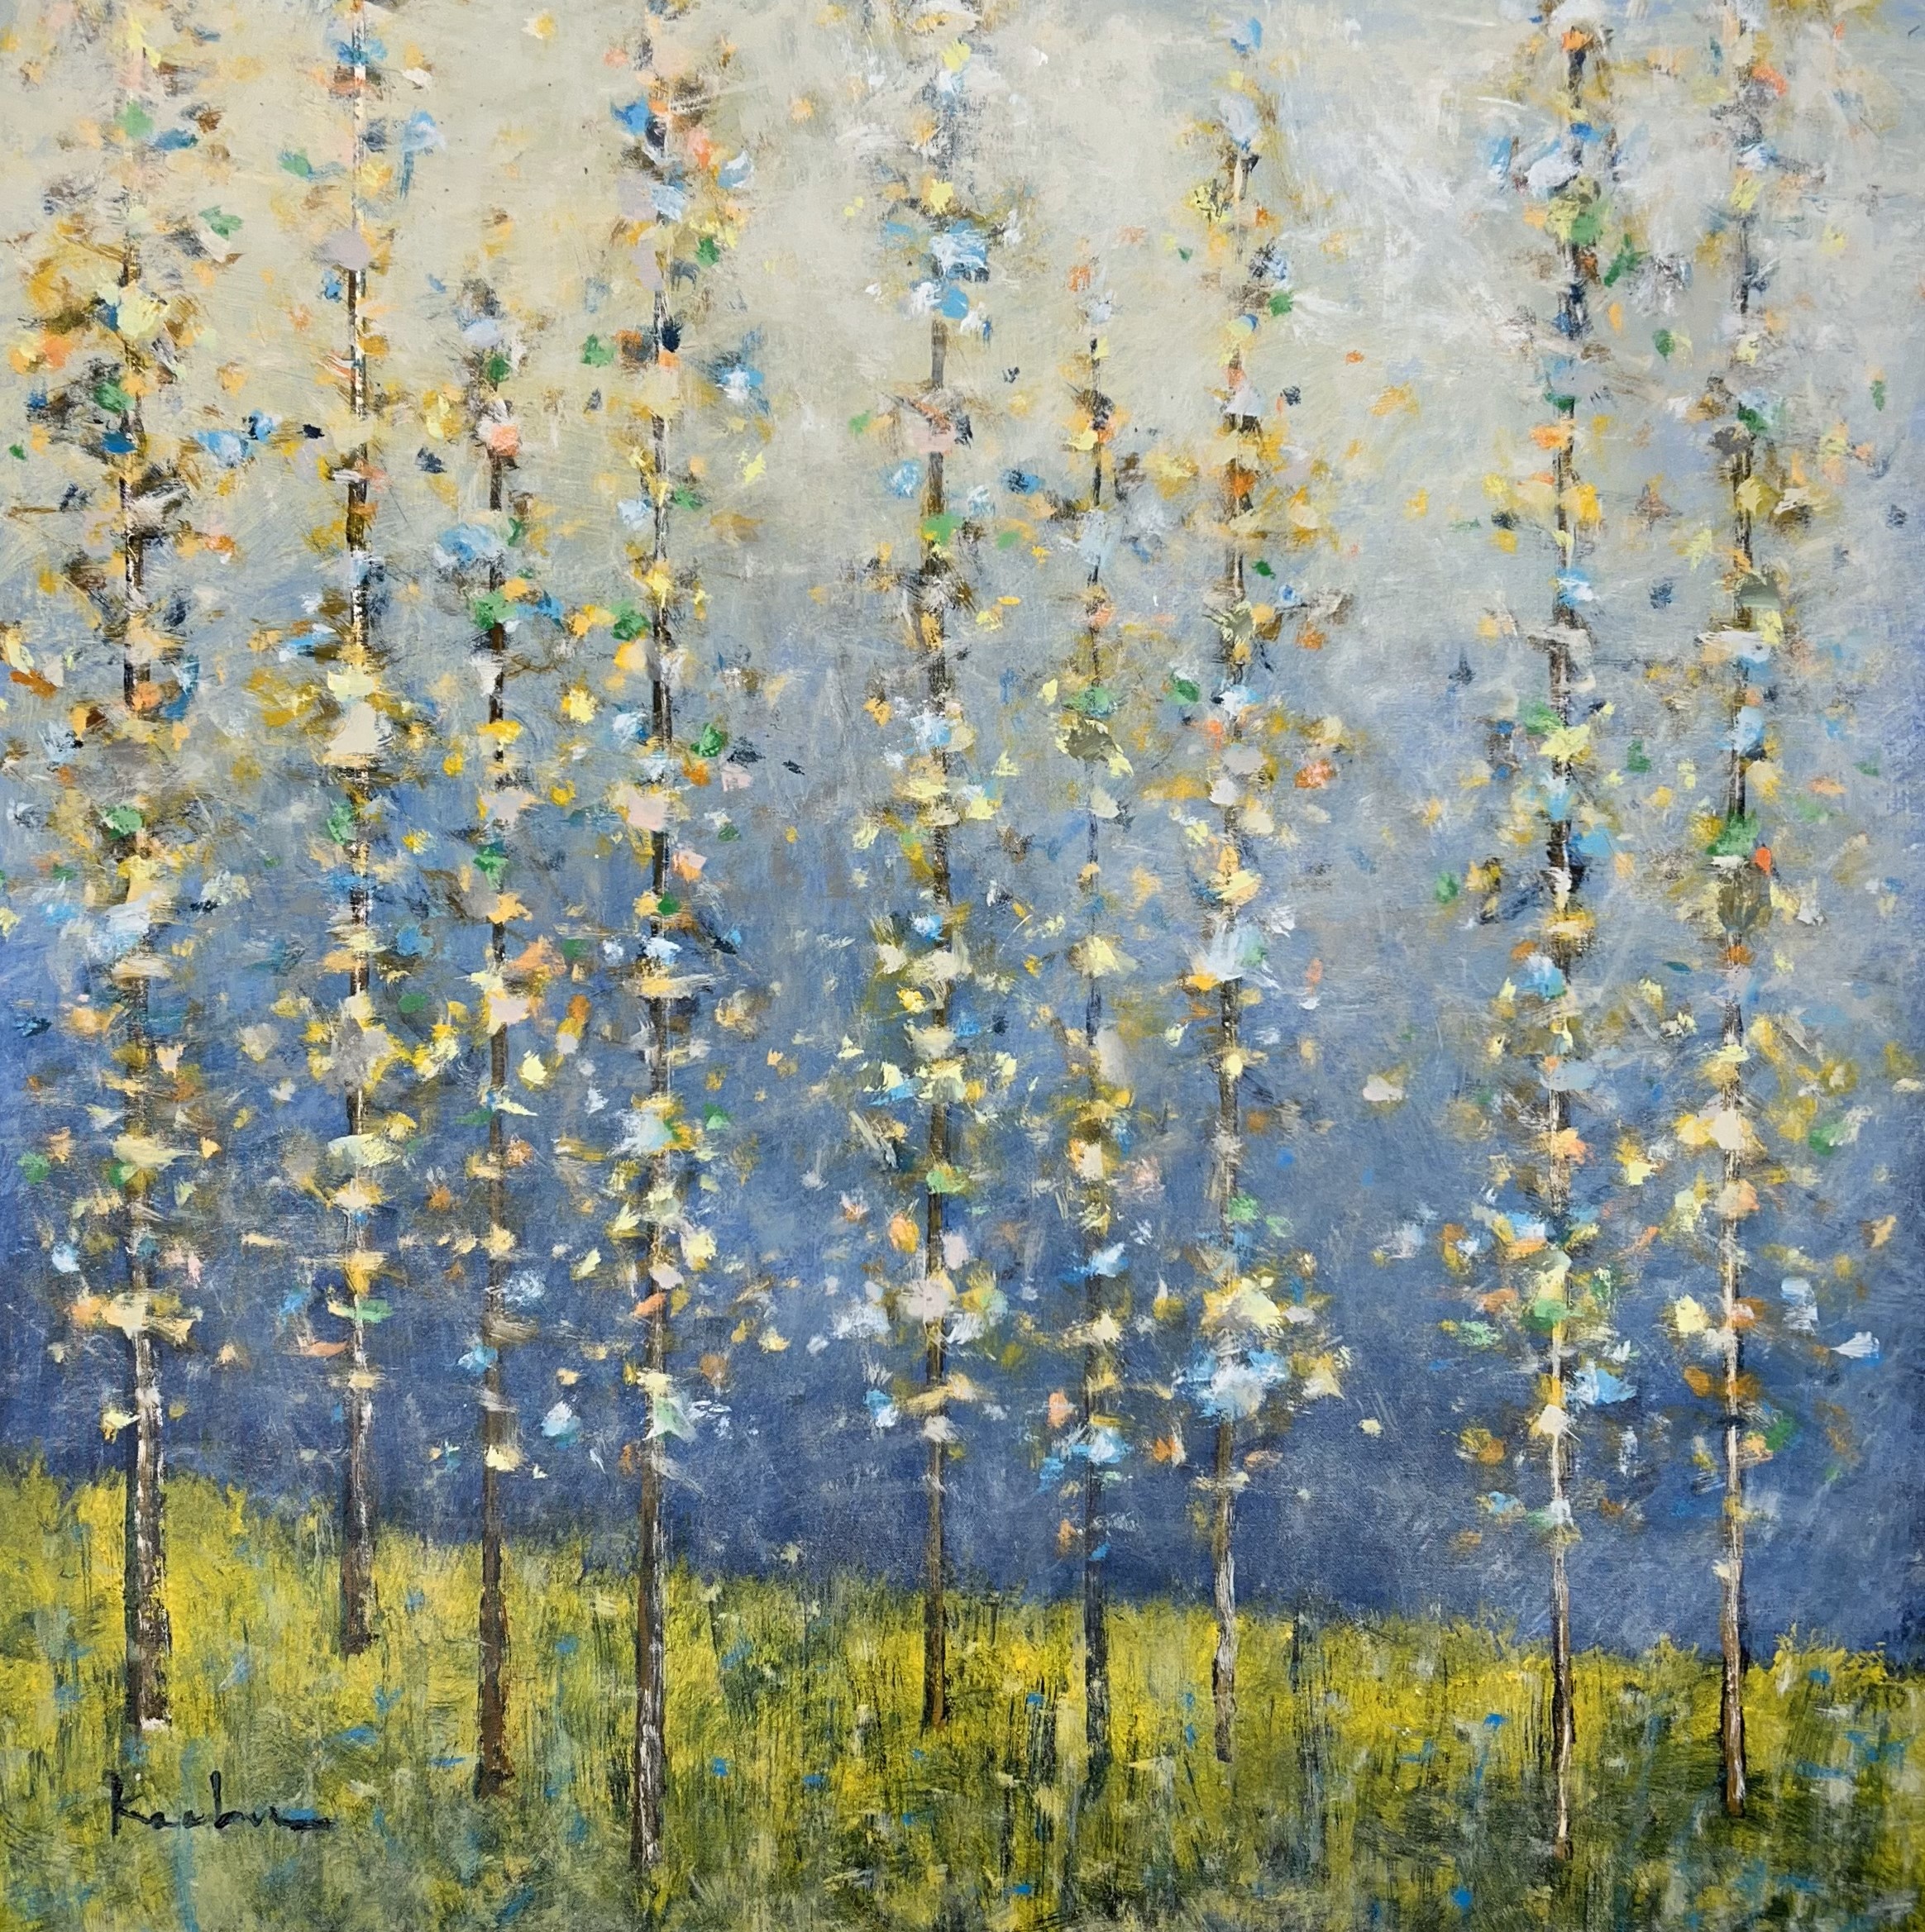 JEFF KOEHN - Blue Glade - Oil on Canvas - 40x40 inches